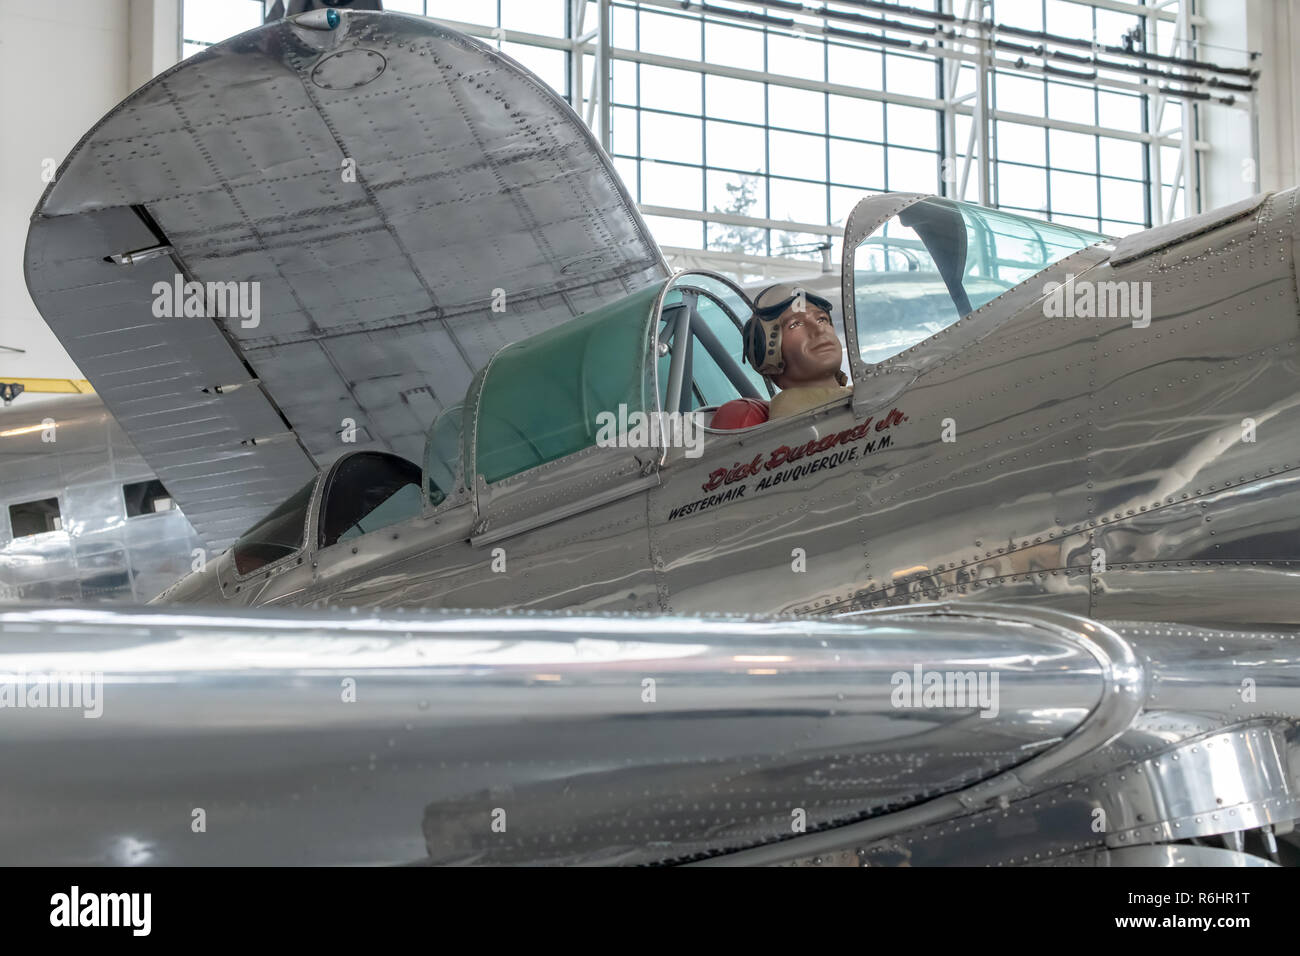 Evergreen Aviation & Space Museum in McMinnville, Oregon Stock Photo